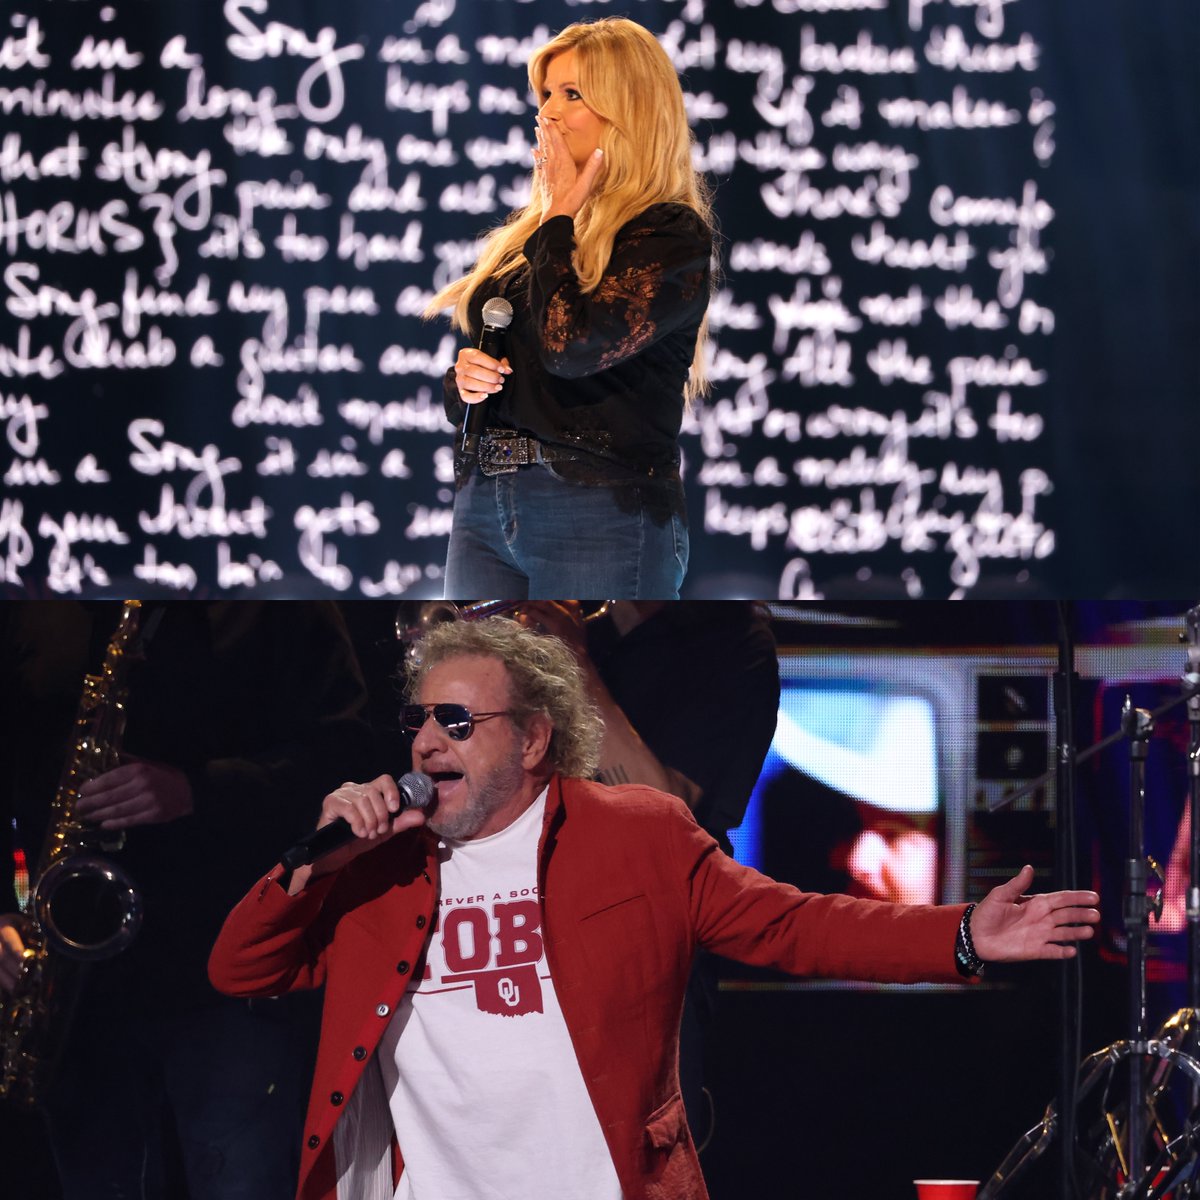 What could make a Texas boy rep Okie gear? A Toby Keith tribute, of course! Rockstar @sammyhagar reacts to participating in the special + @trishayearwood won the brand-new June Carter Cash Humanitarian Award- and she has some delicious tricks up her sleeve 😋🌯 Flip to @CMT now!